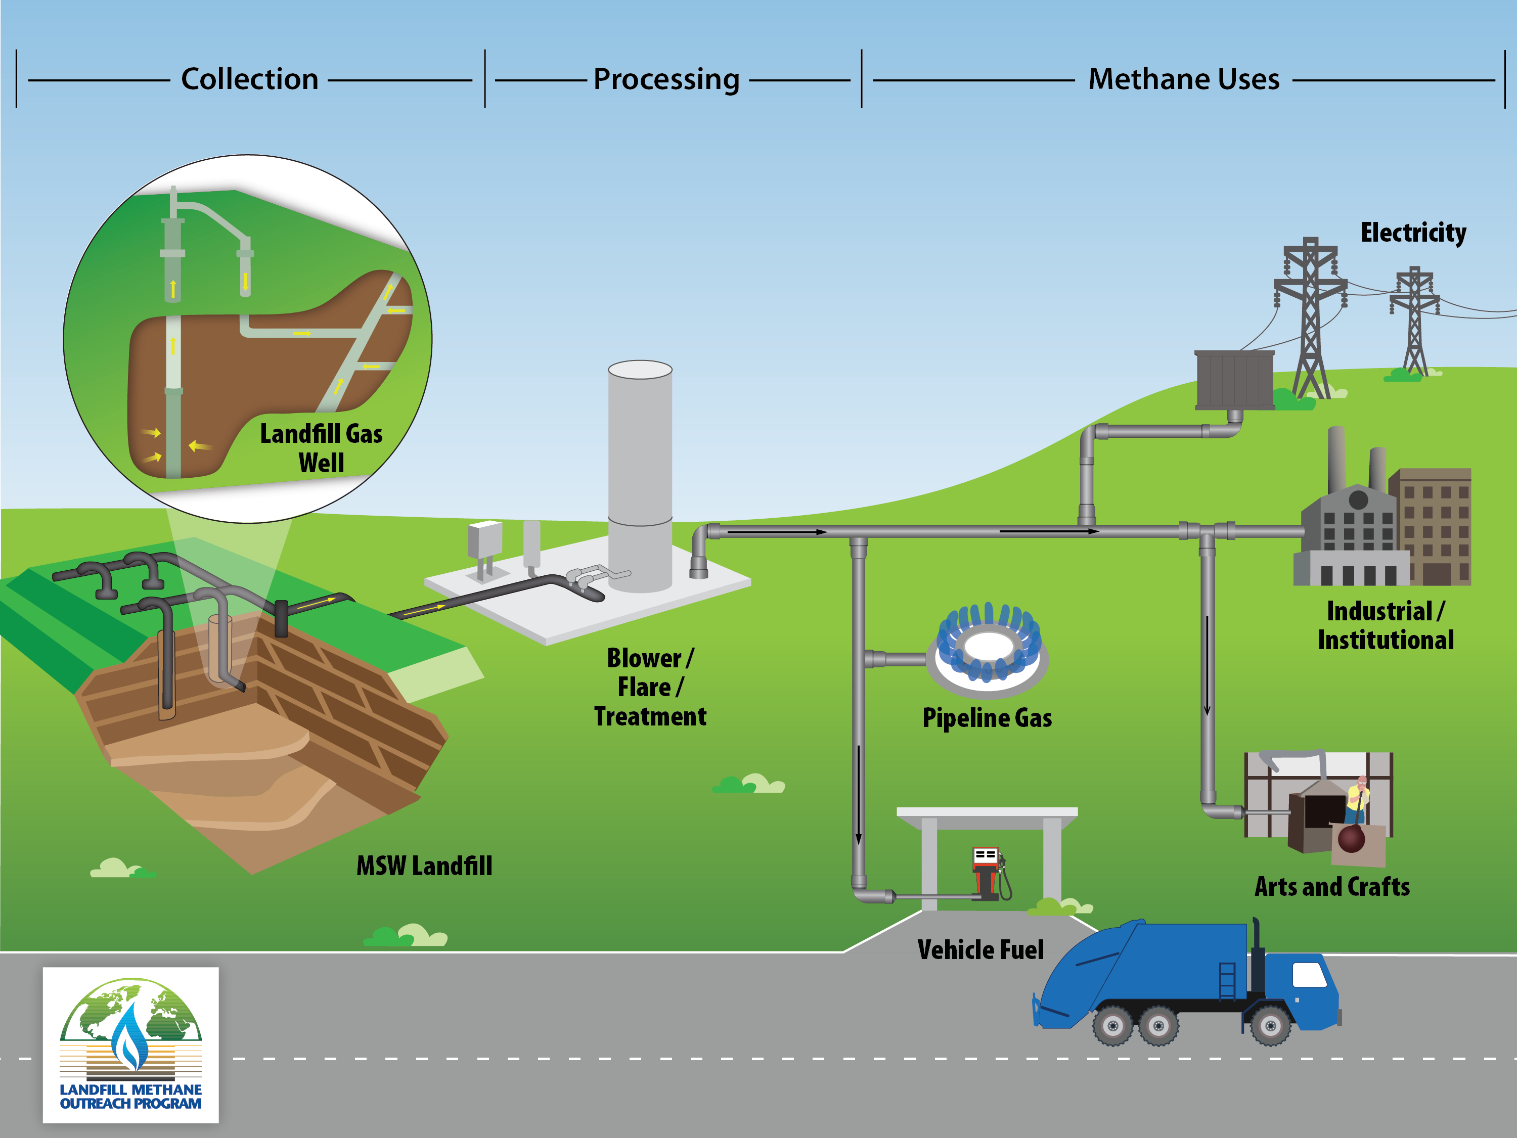 Not all biogas is created equal